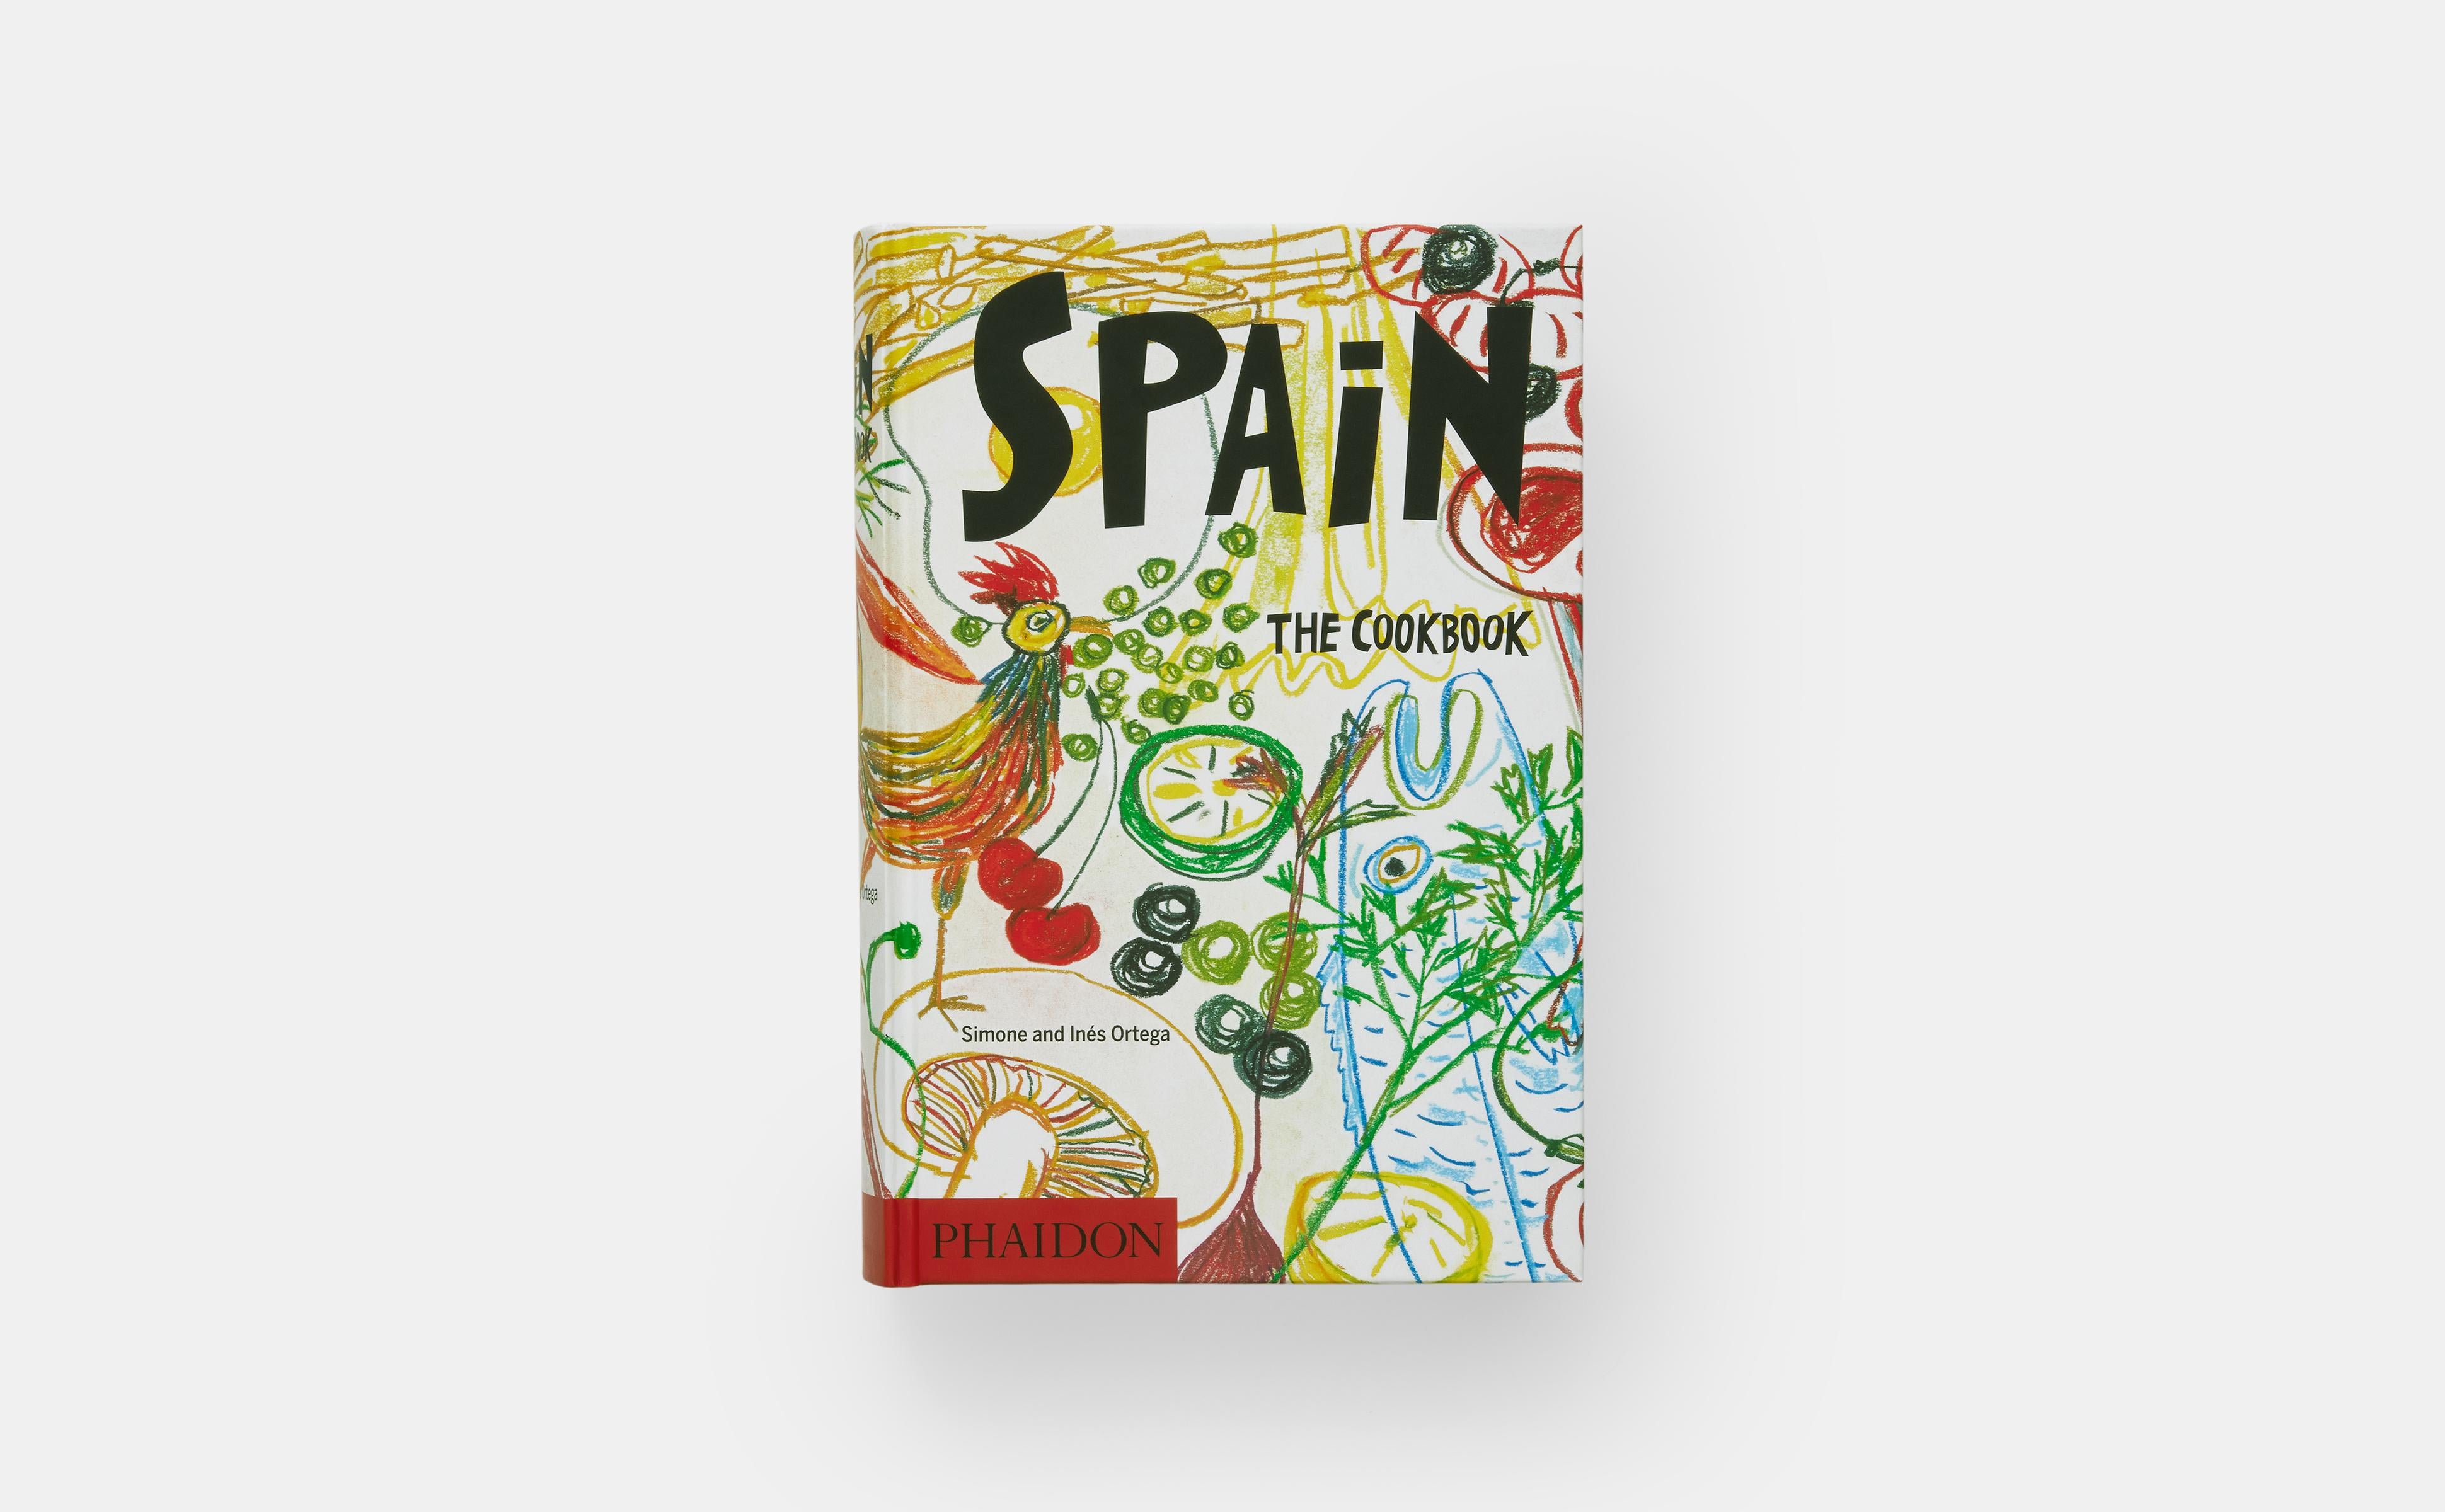 The bestselling book on traditional and authentic Spanish home cooking, with 1,080 easy-to-follow recipes

Spanish cooks have trusted and relied on this traditional home-cooking companion ever since it was first published over 40 years ago, with